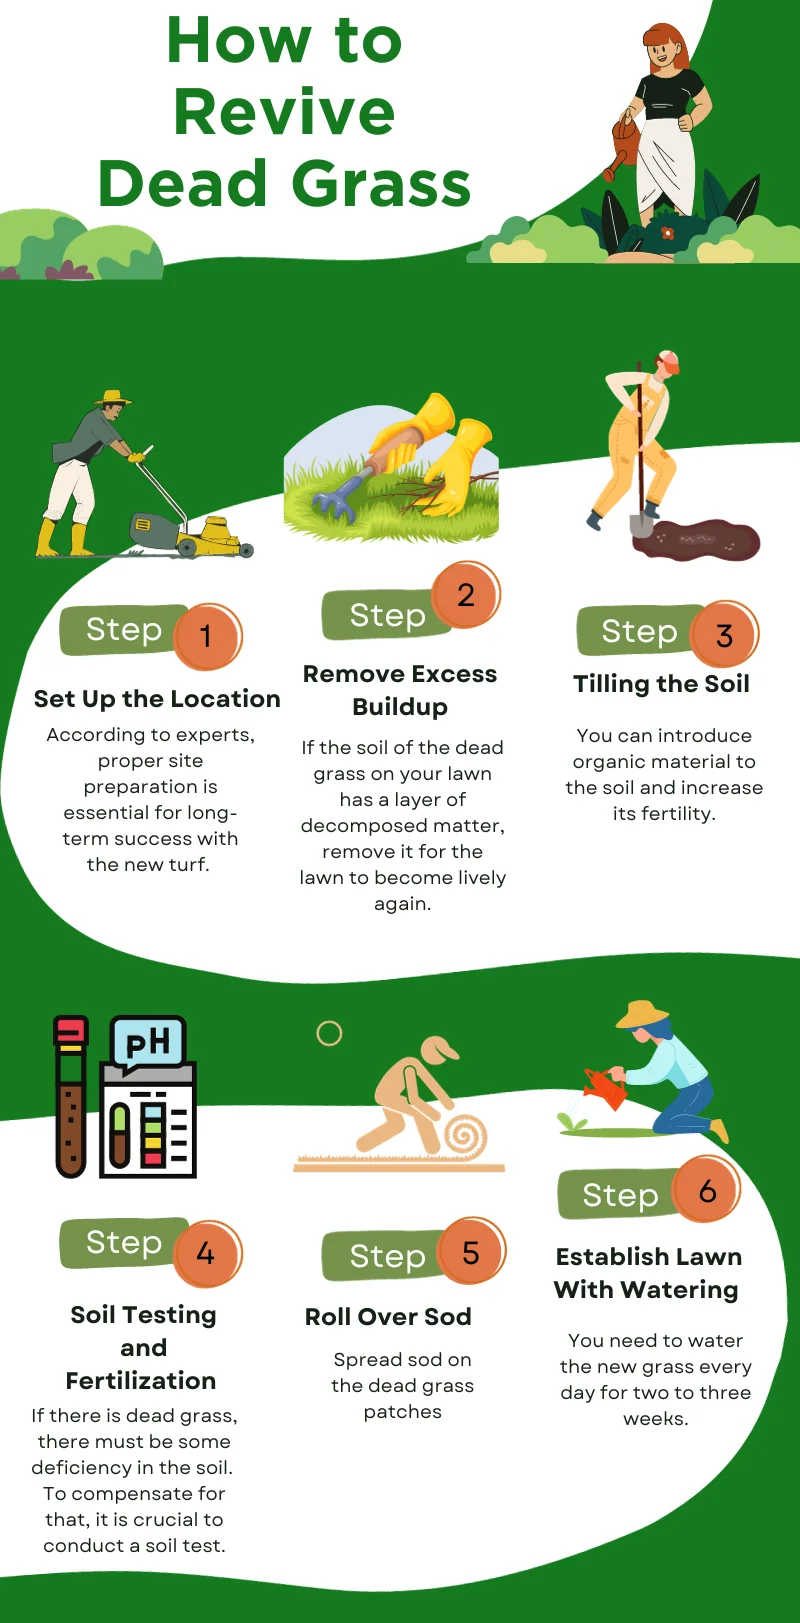 An infographic on the steps of how to revive dead grass